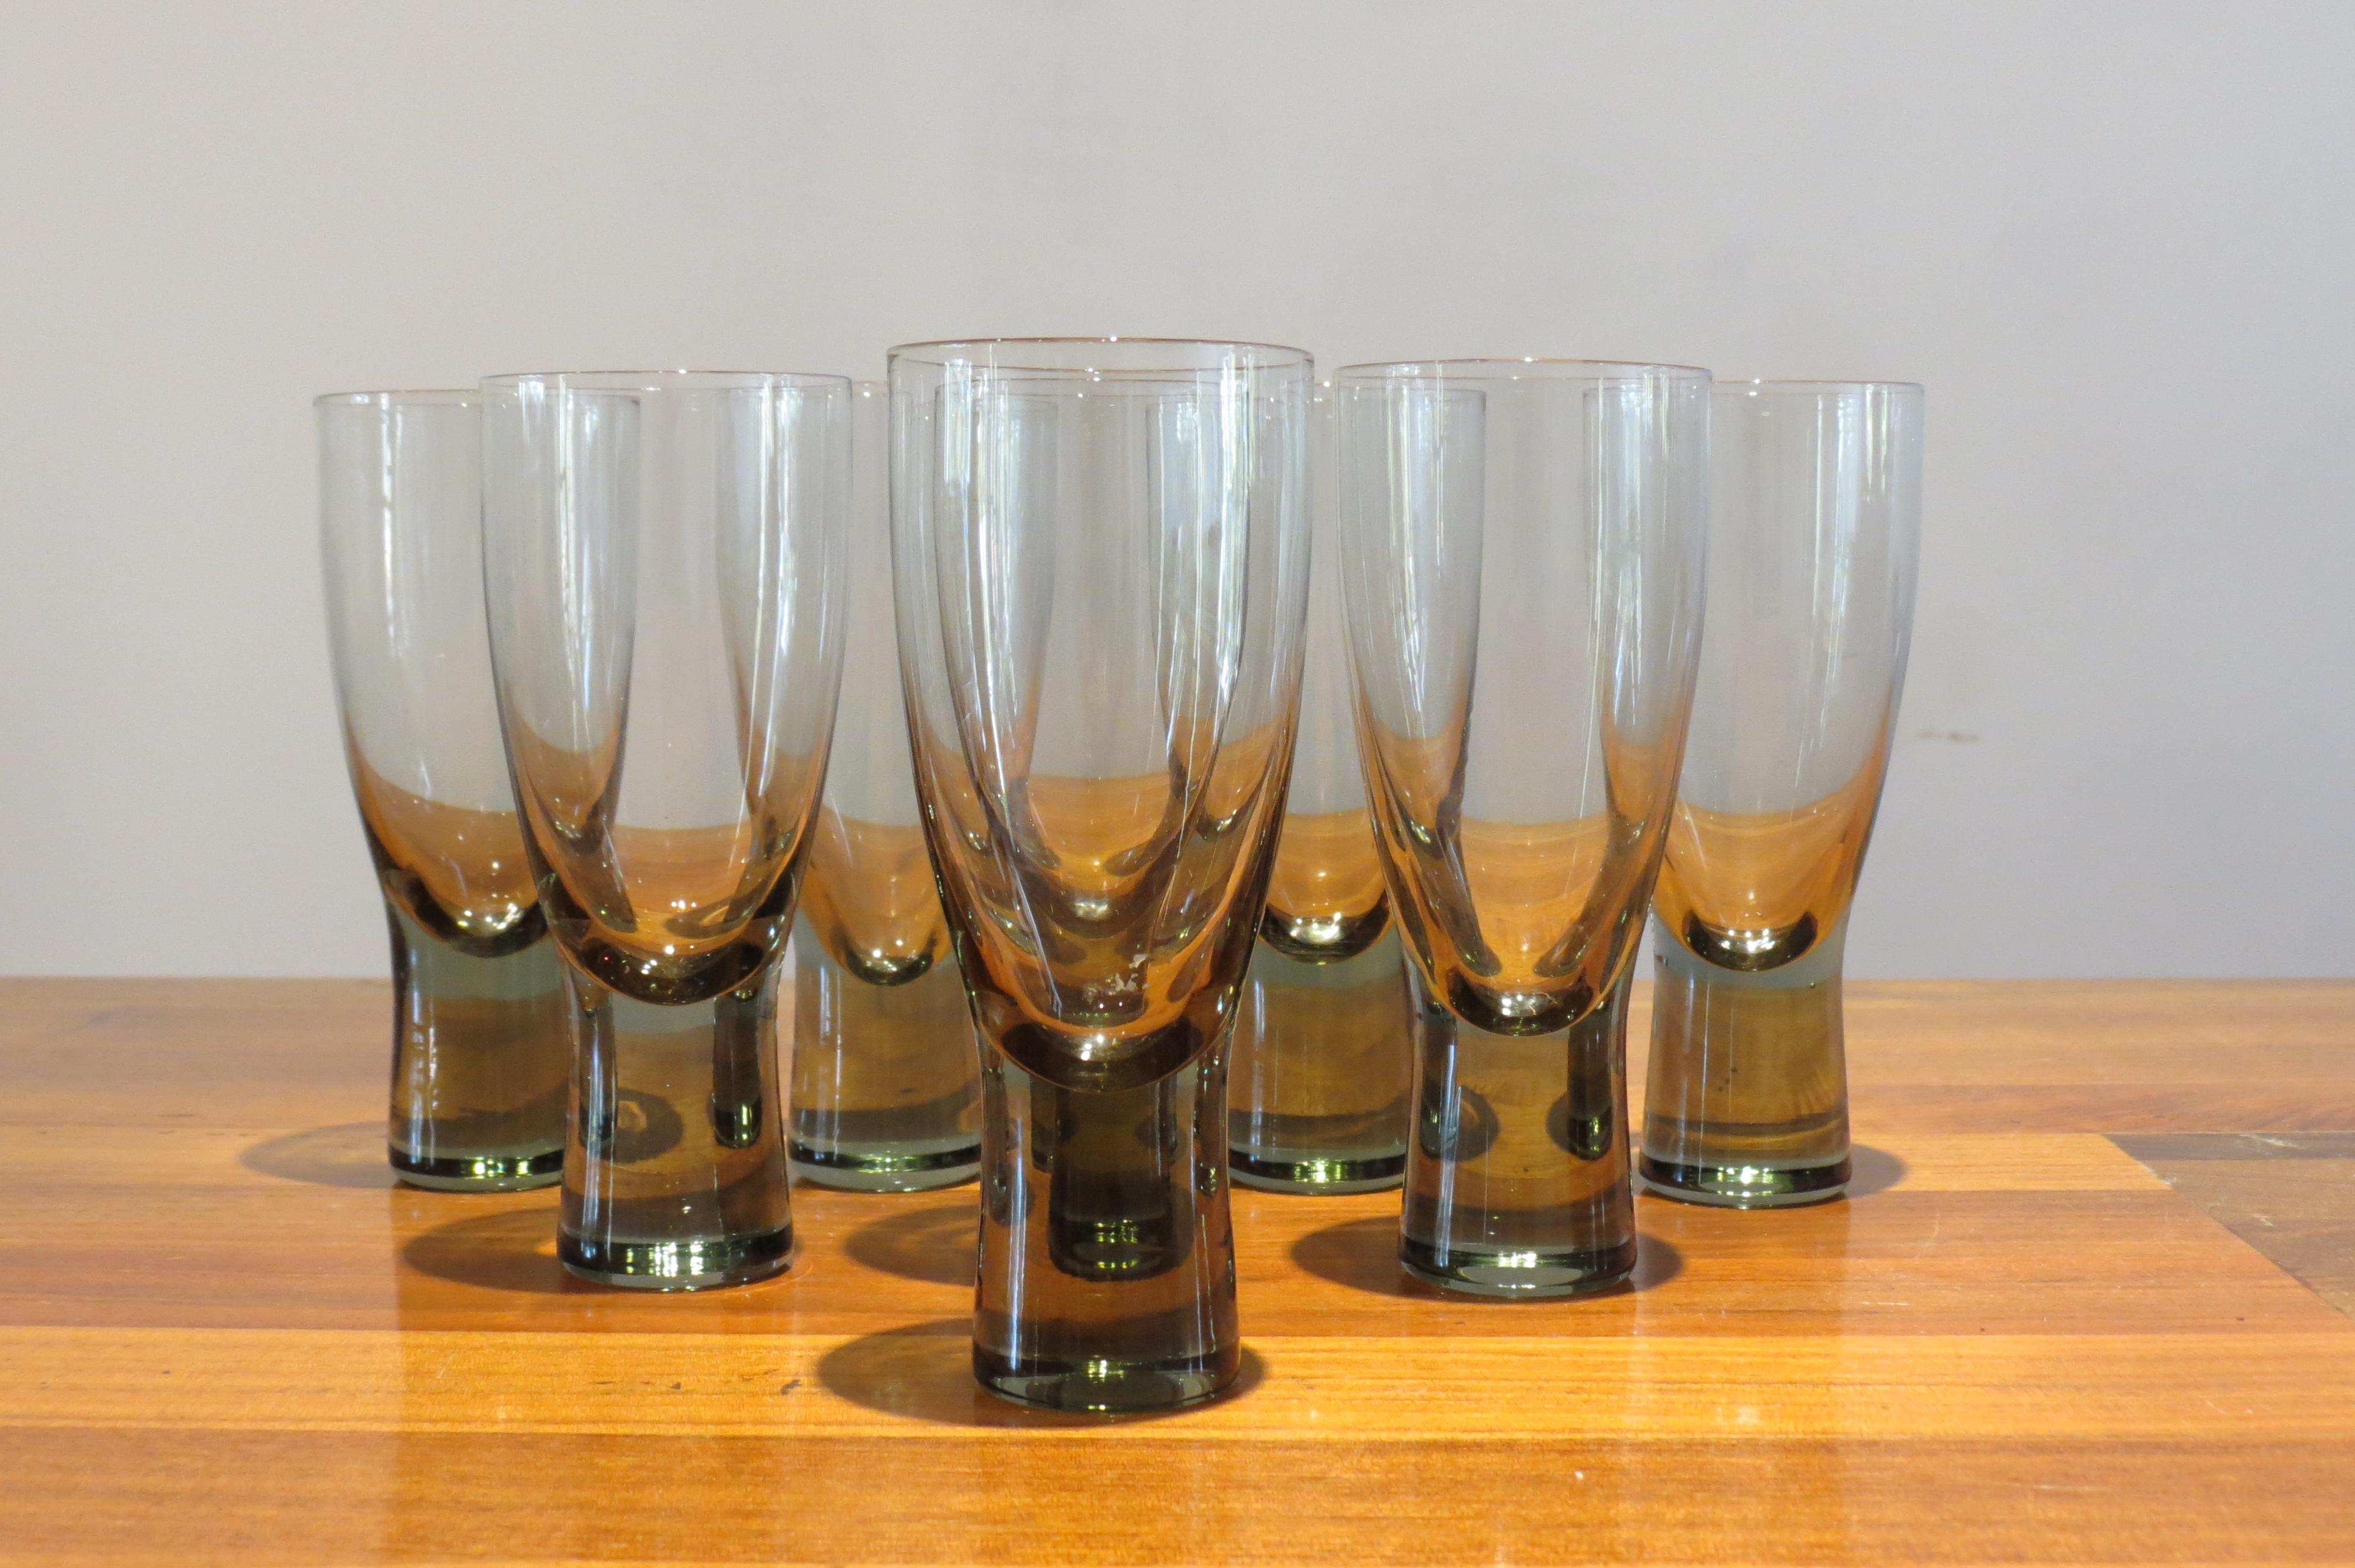 A set of eight vintage Holmegaard glasses.
Designed by Per Lutken, model Canada, 1950s.
Smoked glass.
Good condition.
Measures: 13.5 cm, tall 5.5cm diameter widest point
St925.

 